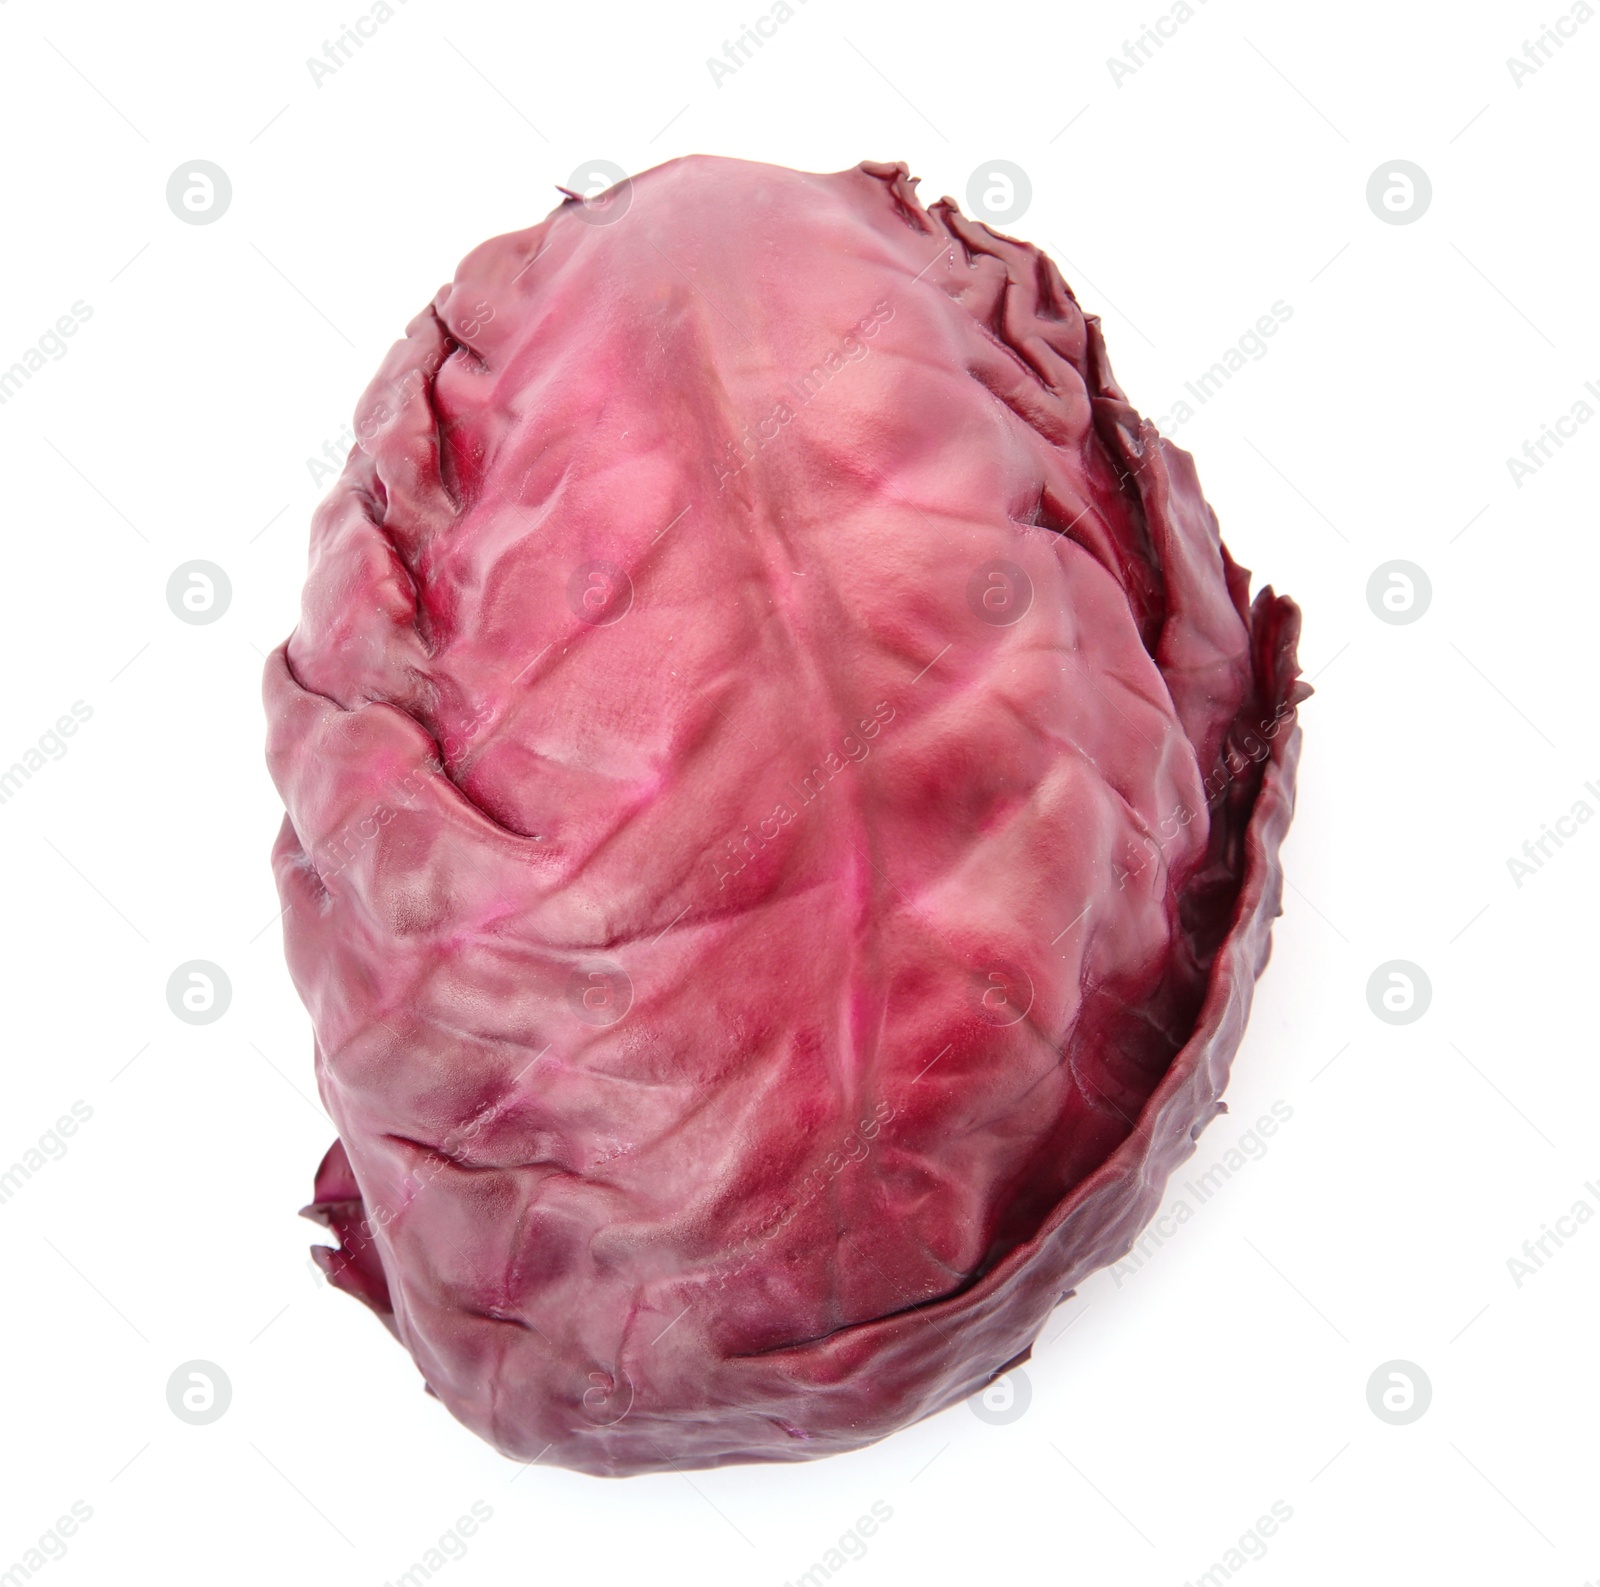 Photo of Leaf of ripe red cabbage on white background, top view